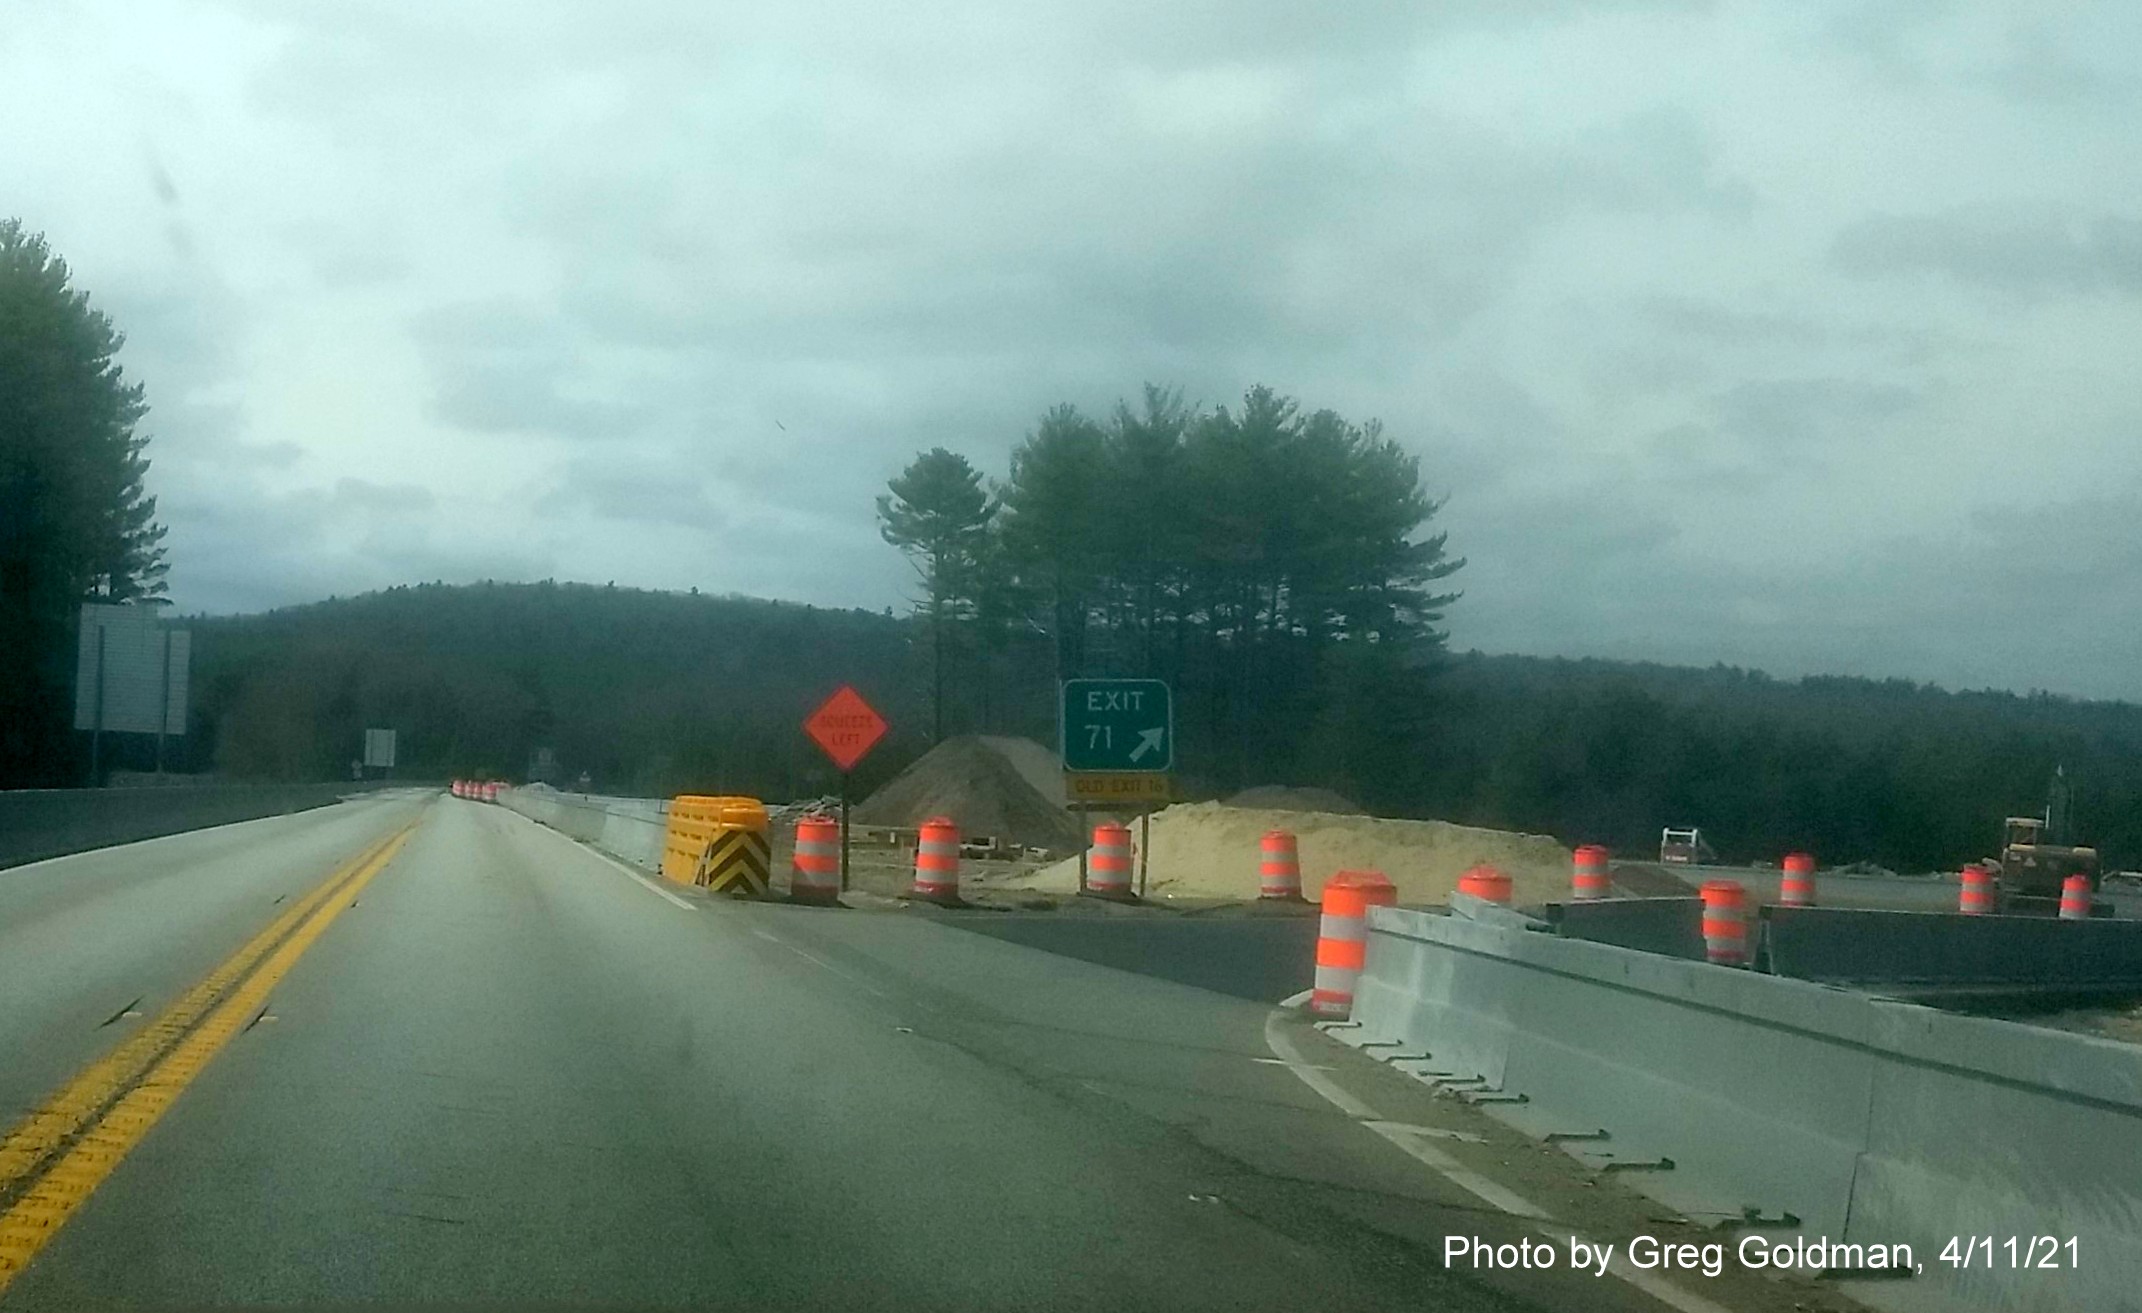 Image of gore sign for US 202 South exit with new milepost based exit number and yellow Old Exit 16 sign attached below on MA 2 West in Athol, by Greg Goldman, April 2021